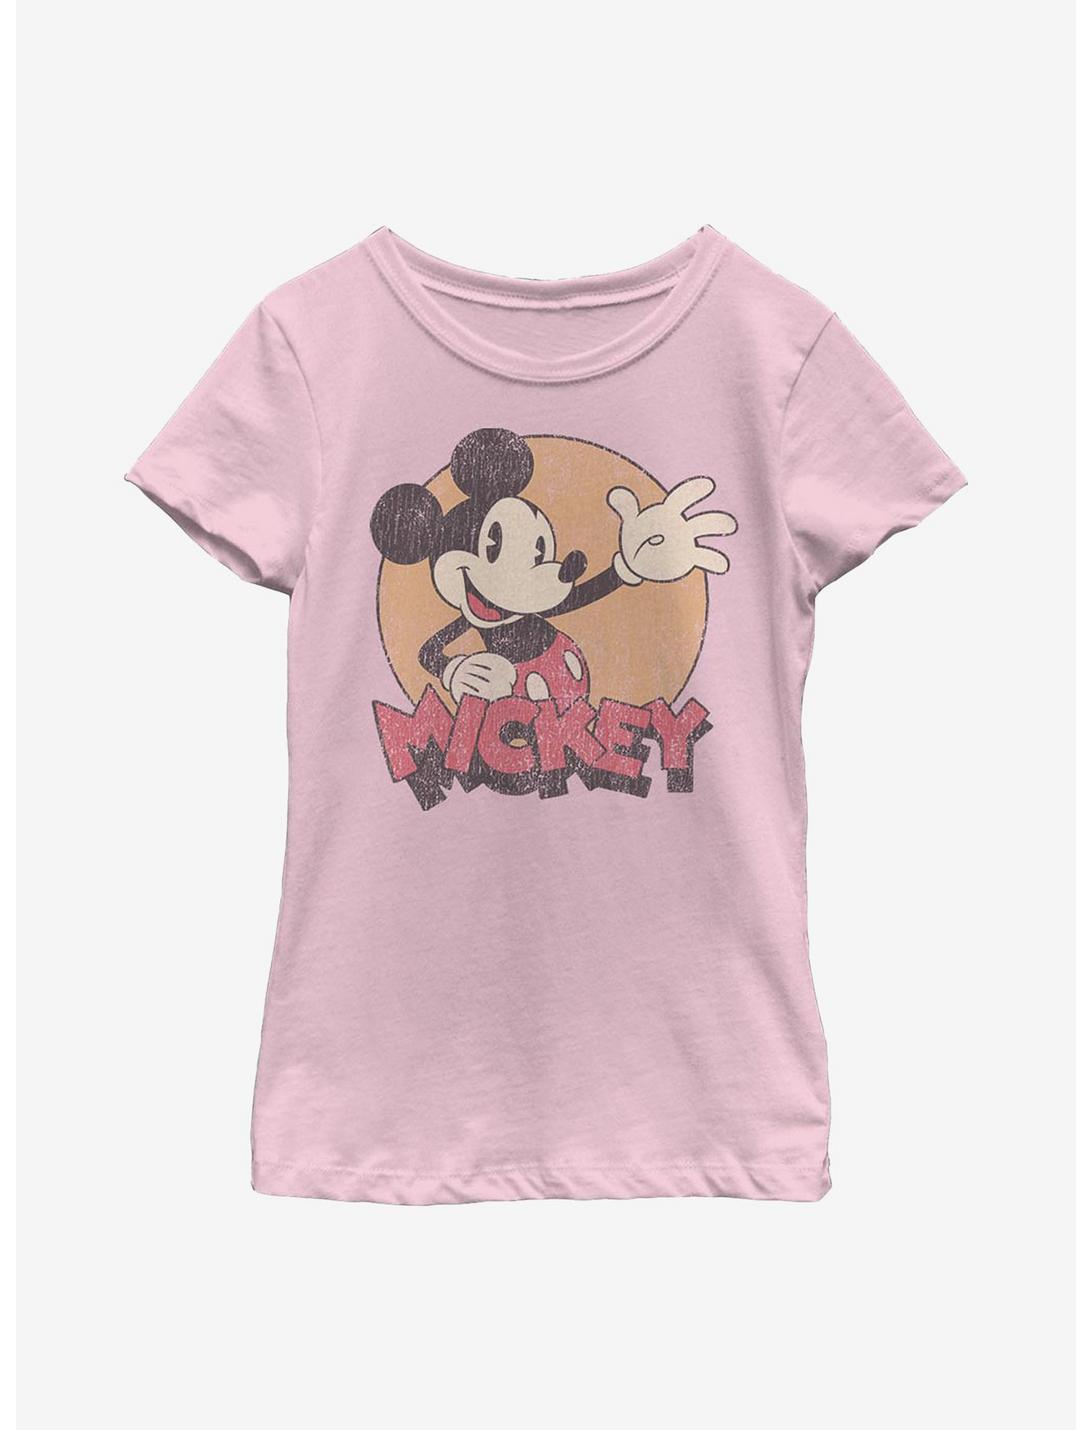 Disney Mickey Mouse Tried And True Youth Girls T-Shirt, PINK, hi-res